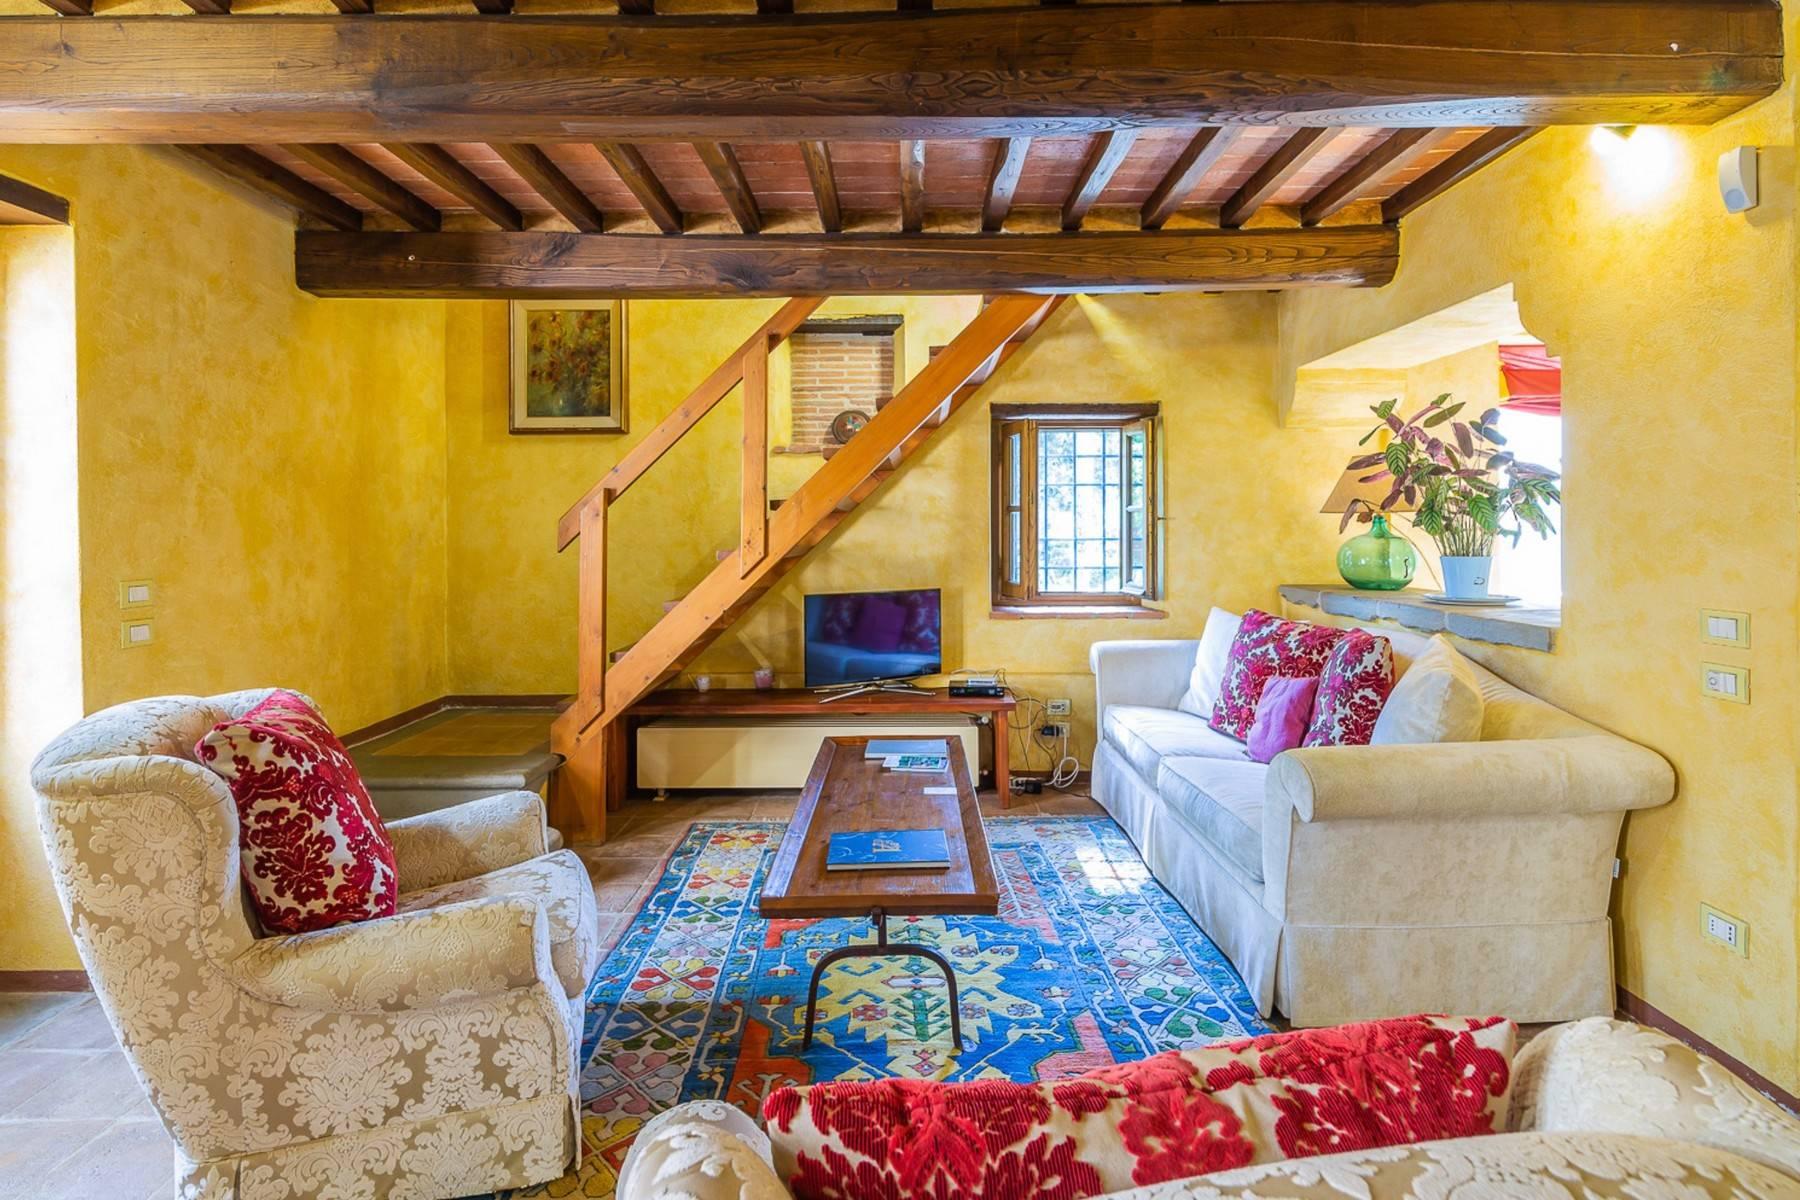 Majestic Luxury Villa with outbuildings on the hills south of Lucca - 17